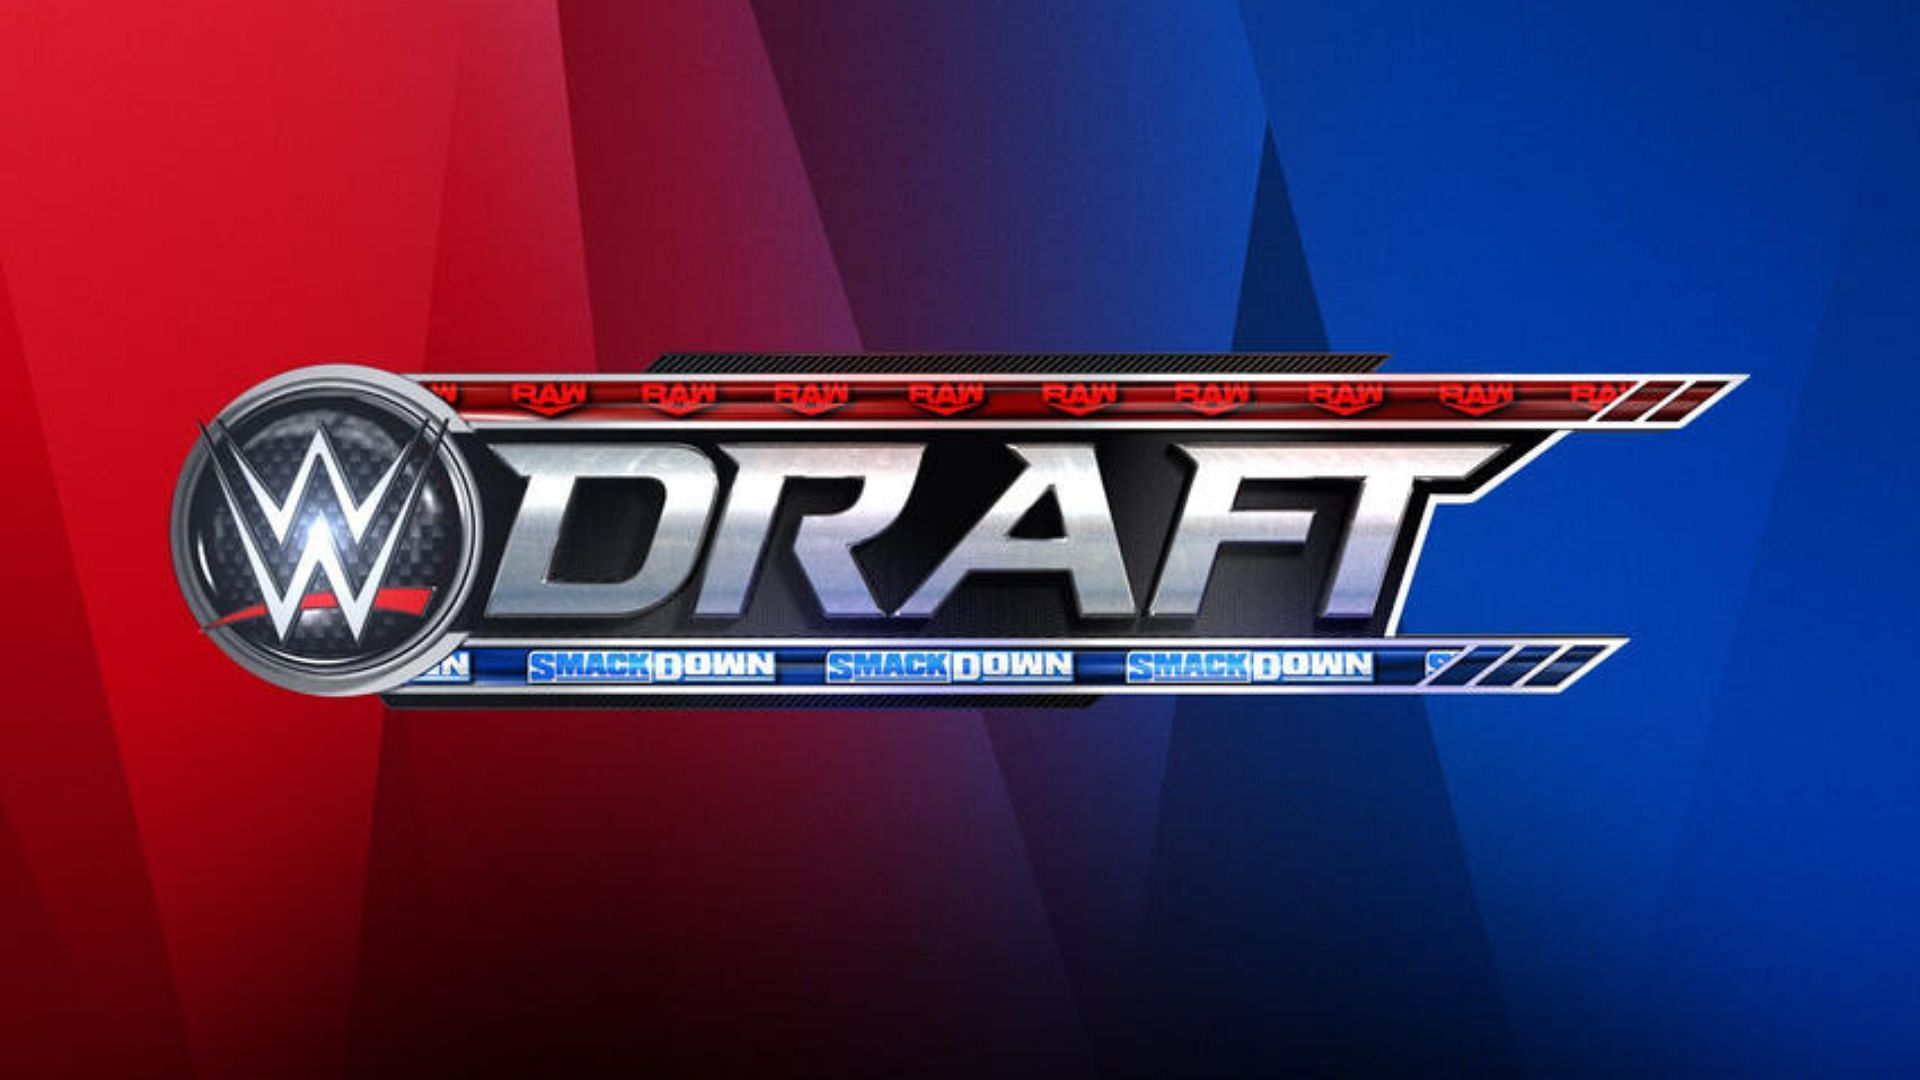 The draft will be starting this week on SmackDown.